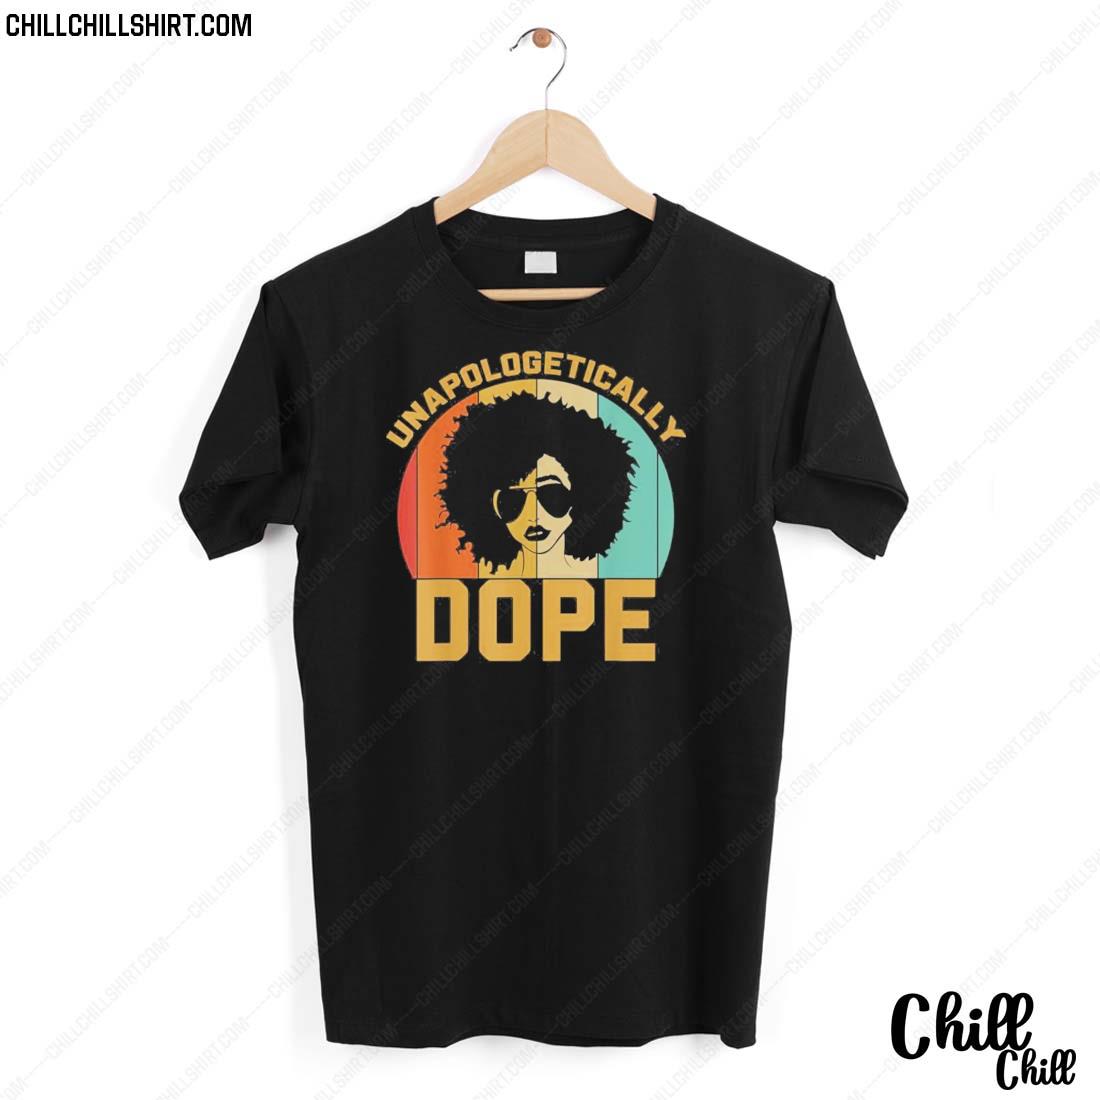 Official awesome Unapologetically Dope Shirt